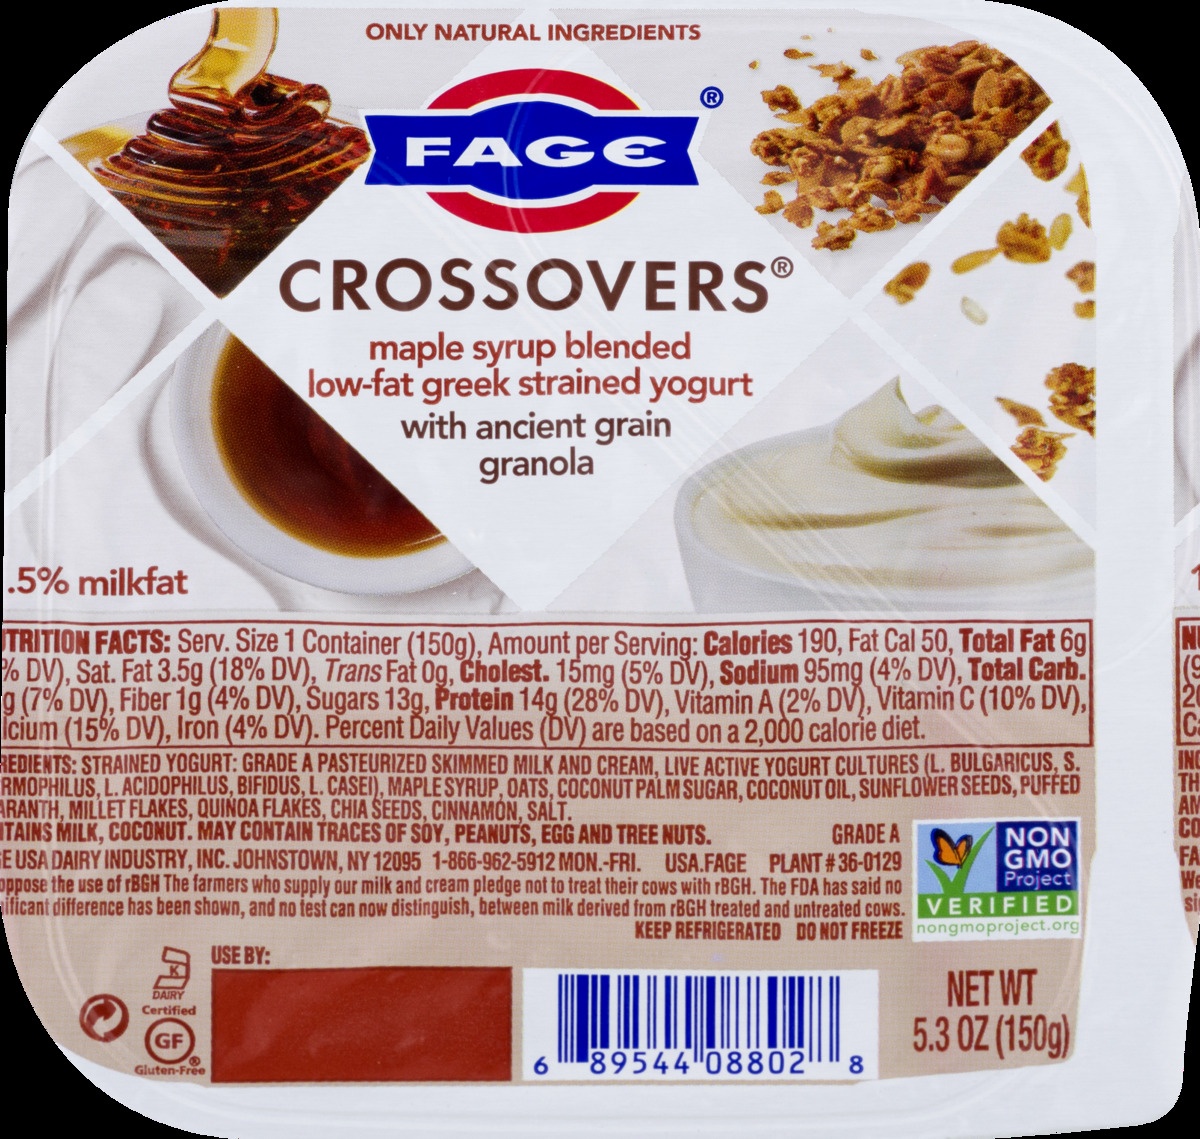 slide 10 of 11, Fage Crossovers Maple Syrup Blended Low-Fat Greek Strained Yogurt With Ancient Grain Granola, 5.3 oz